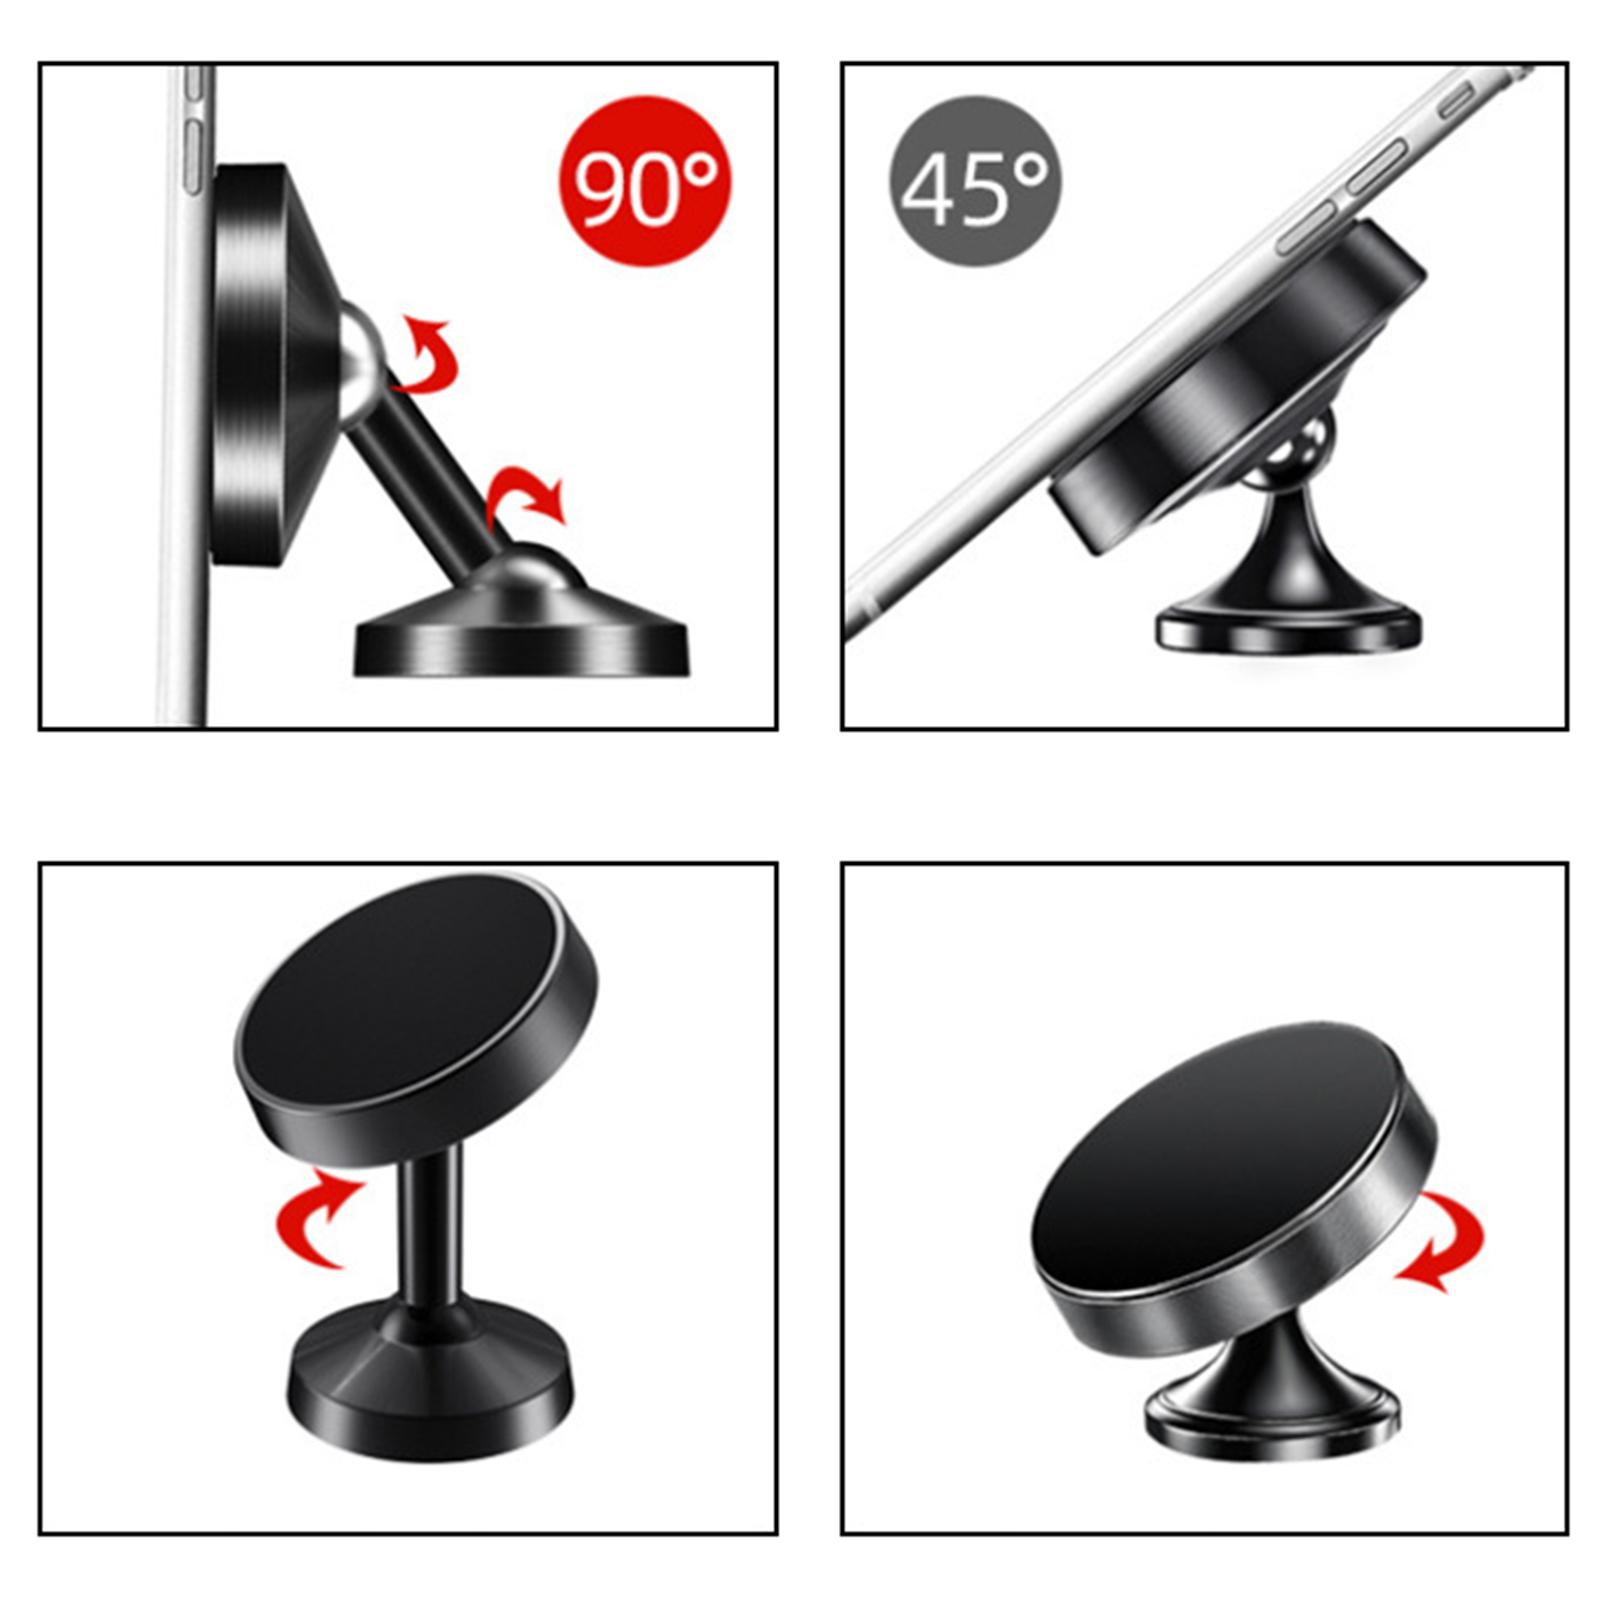 Phone Holder Stable Support 360° Rotation Multifunctional Phone Mount Stand Black